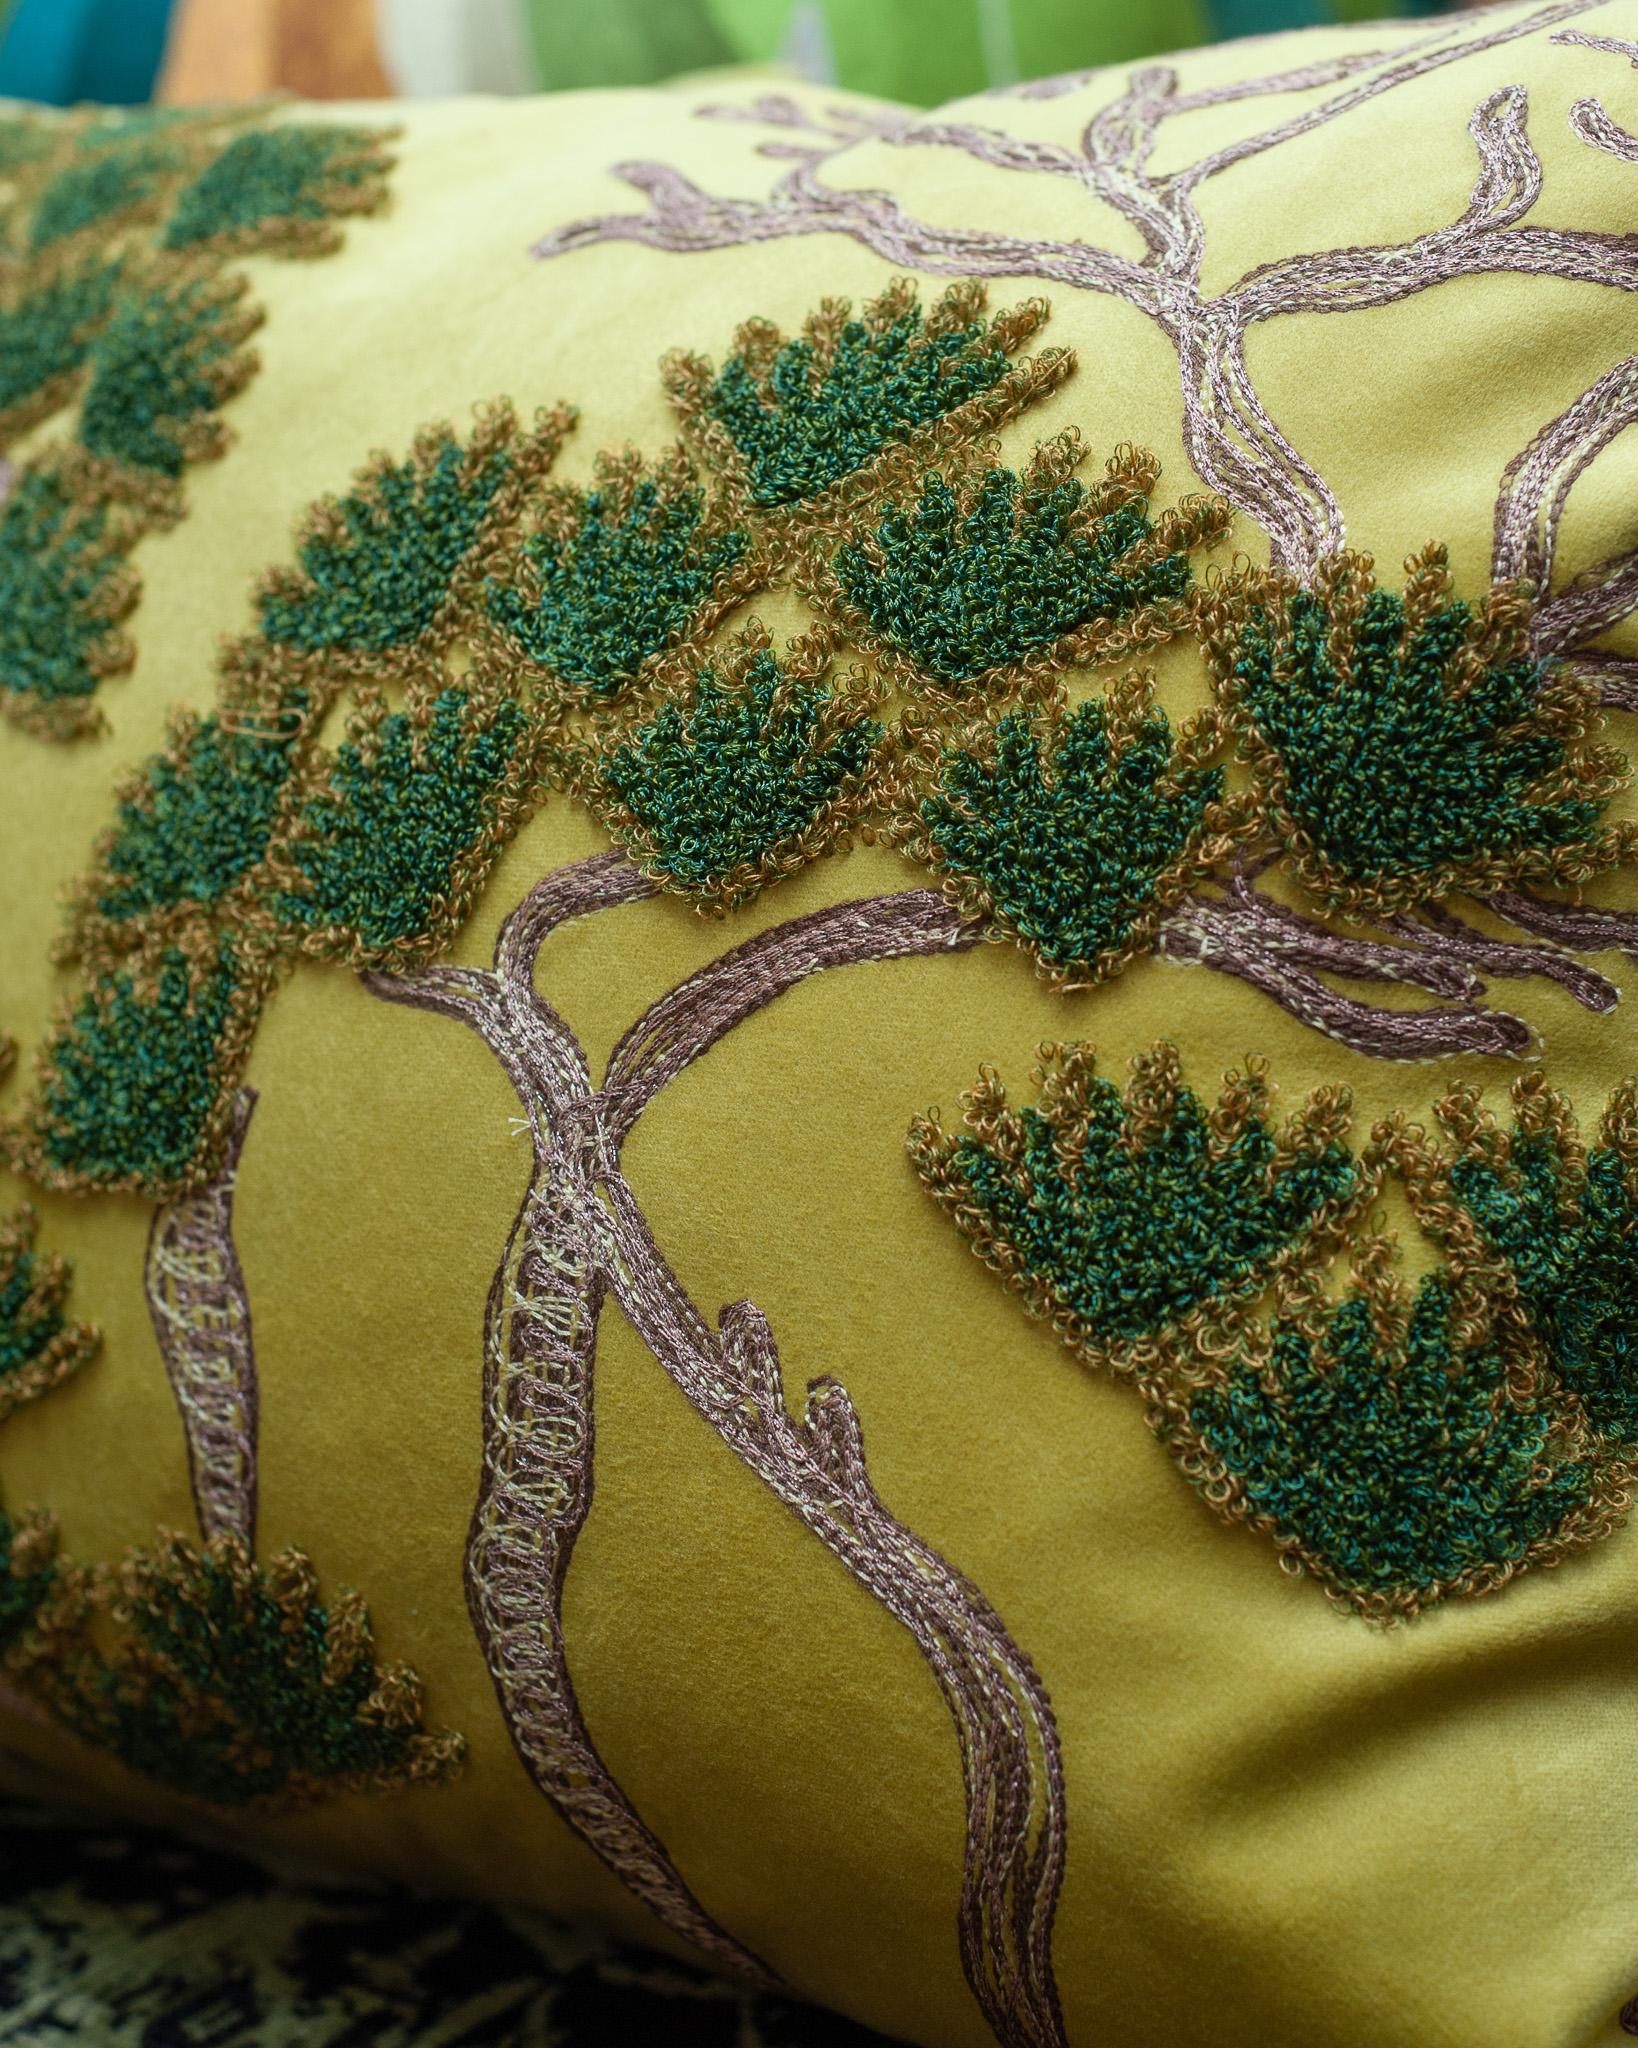 Lebanese Contemporary Embroidered Pillow on Yellow Green Ultrasuede with Pine Trees For Sale